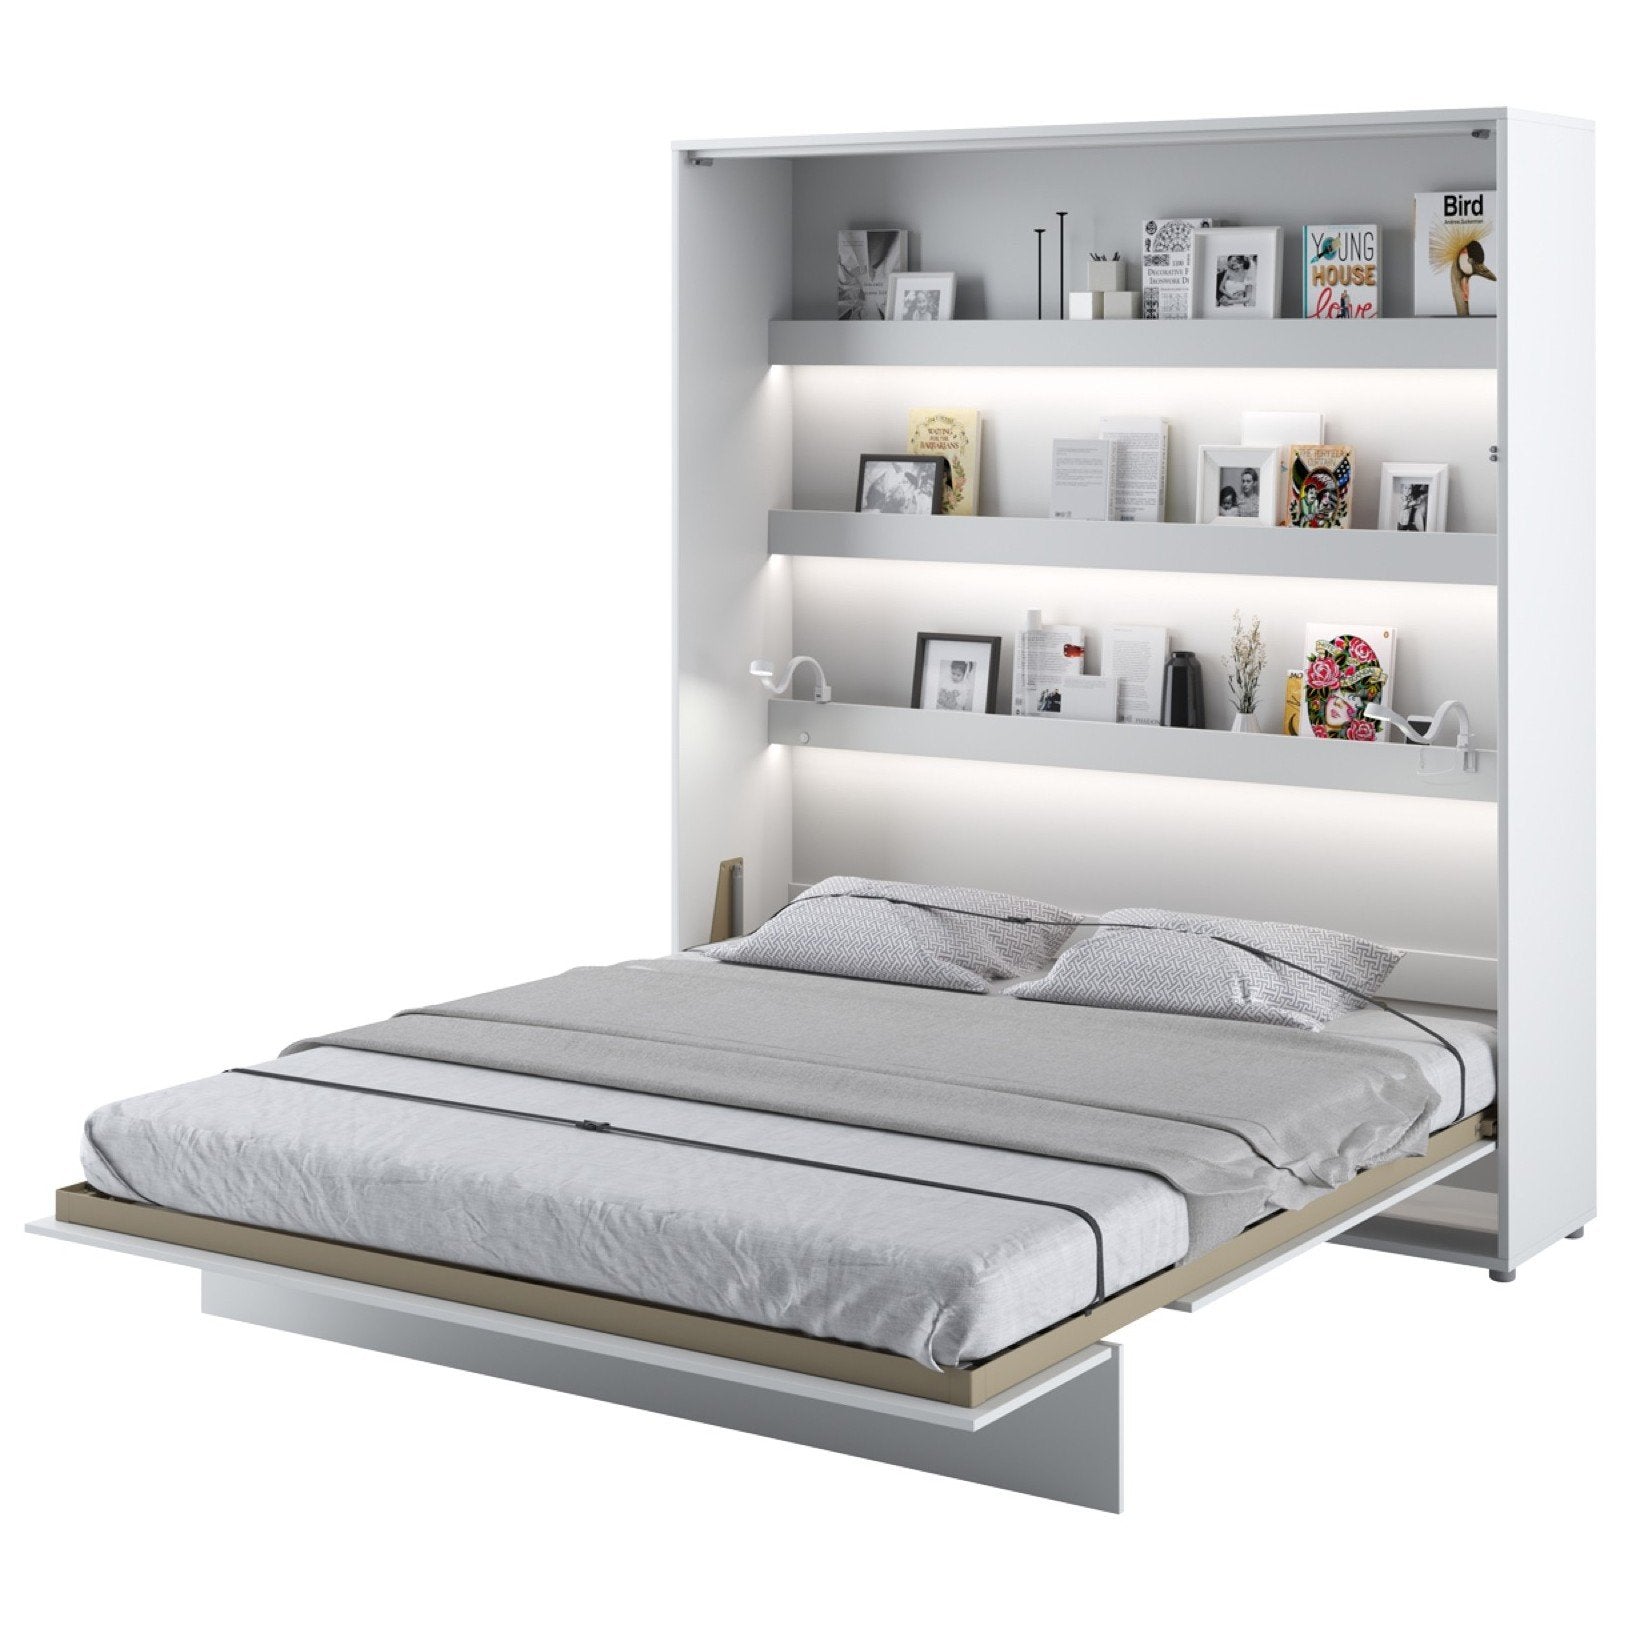 View BC13 Vertical Wall Bed Concept 180cm Murphy Bed White Gloss 180 x 200cm information